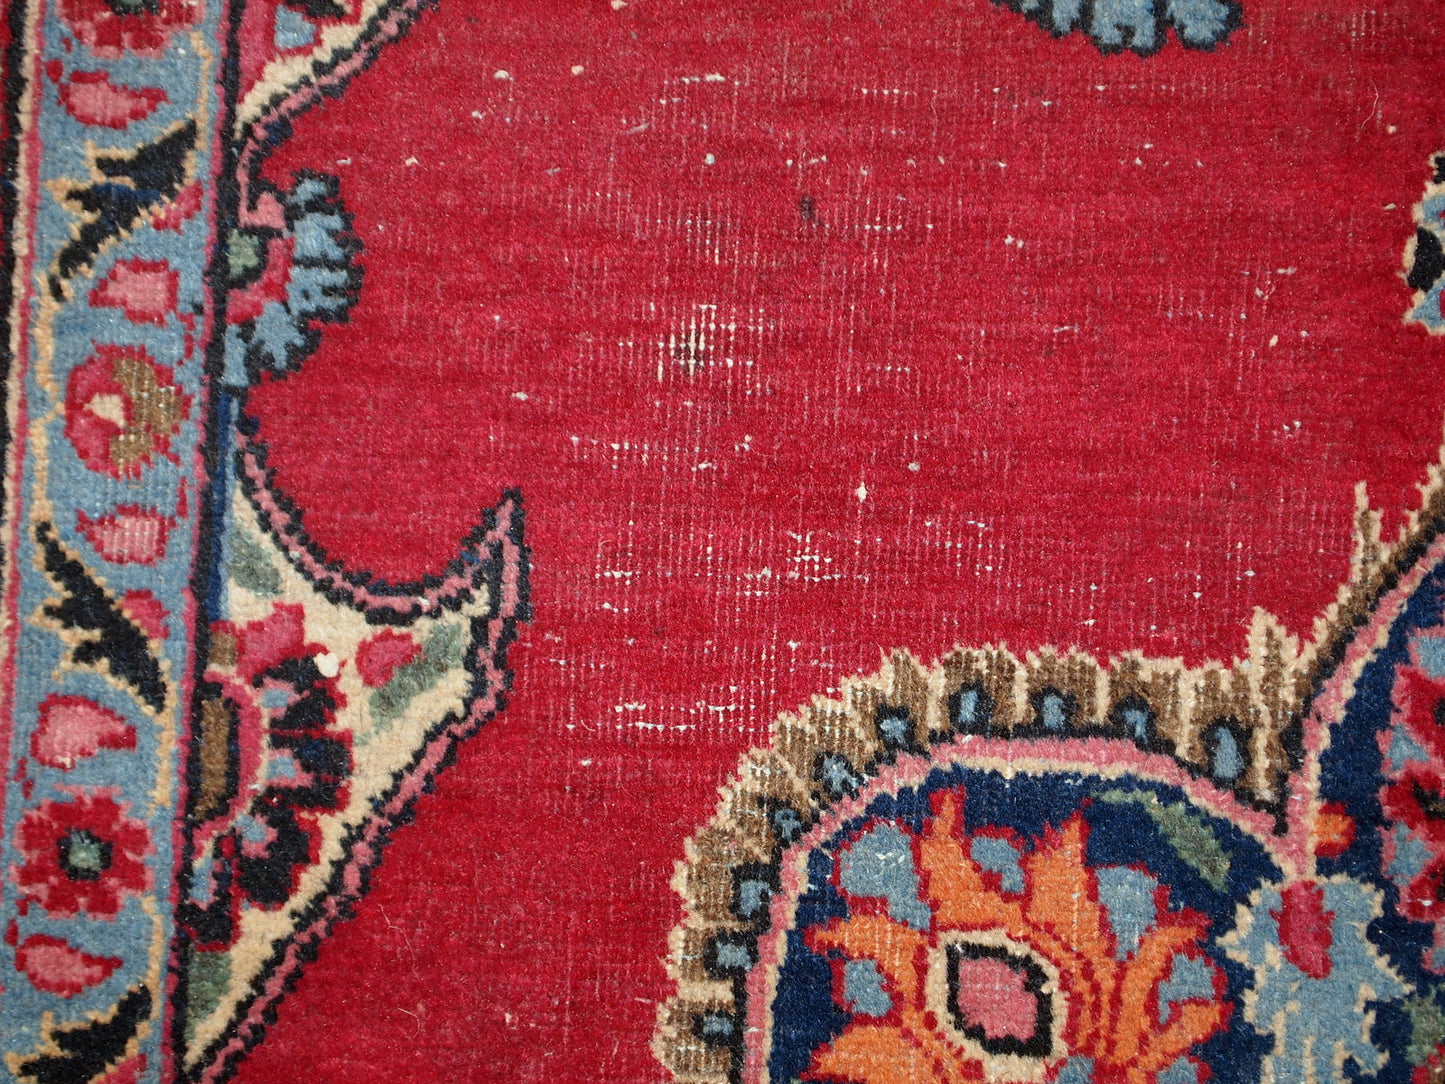 Vintage Persian Kazvin rug in bright red color. The rug is from the end of 20th century. It is in original condition, has some low pile.